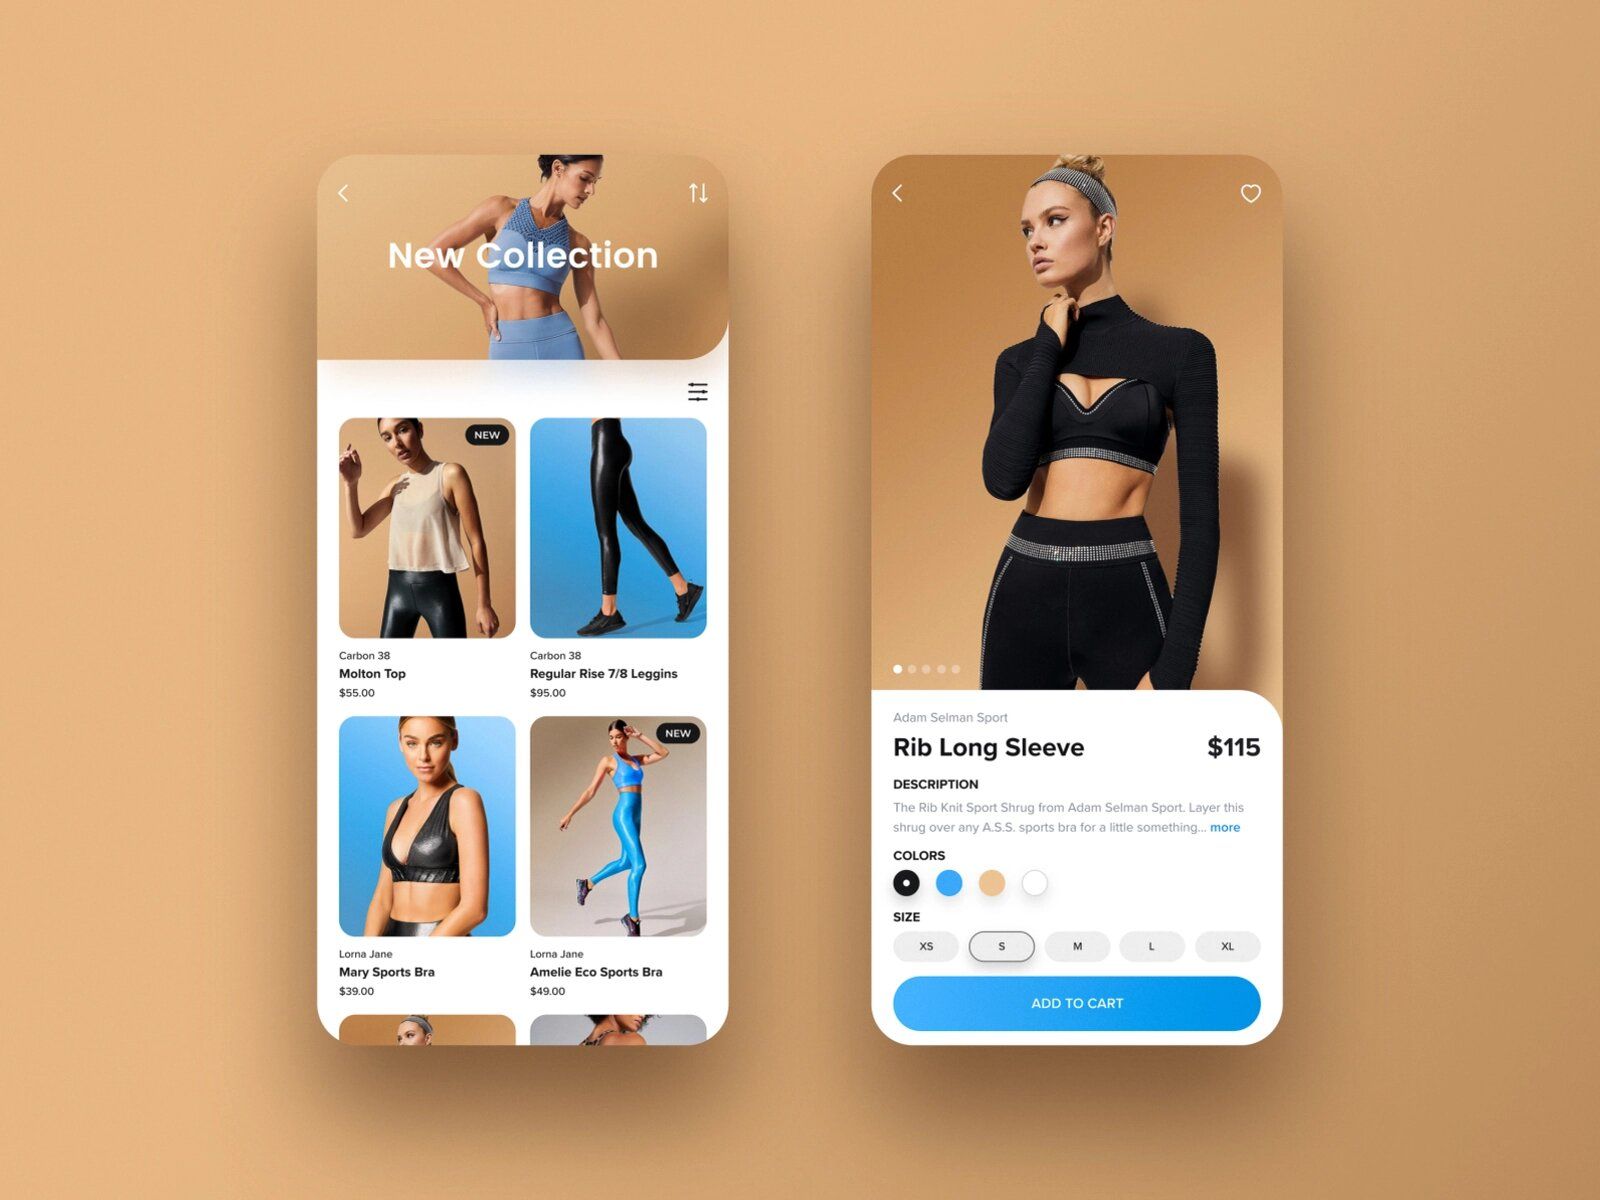 Such a wearable device like smart shorts can also be used by trainers for tracking participants’ performance during group fitness  (*image by [Jakub Bobuski](https://dribbble.com/Bobuski){ rel="nofollow" target="_blank" .default-md}*)